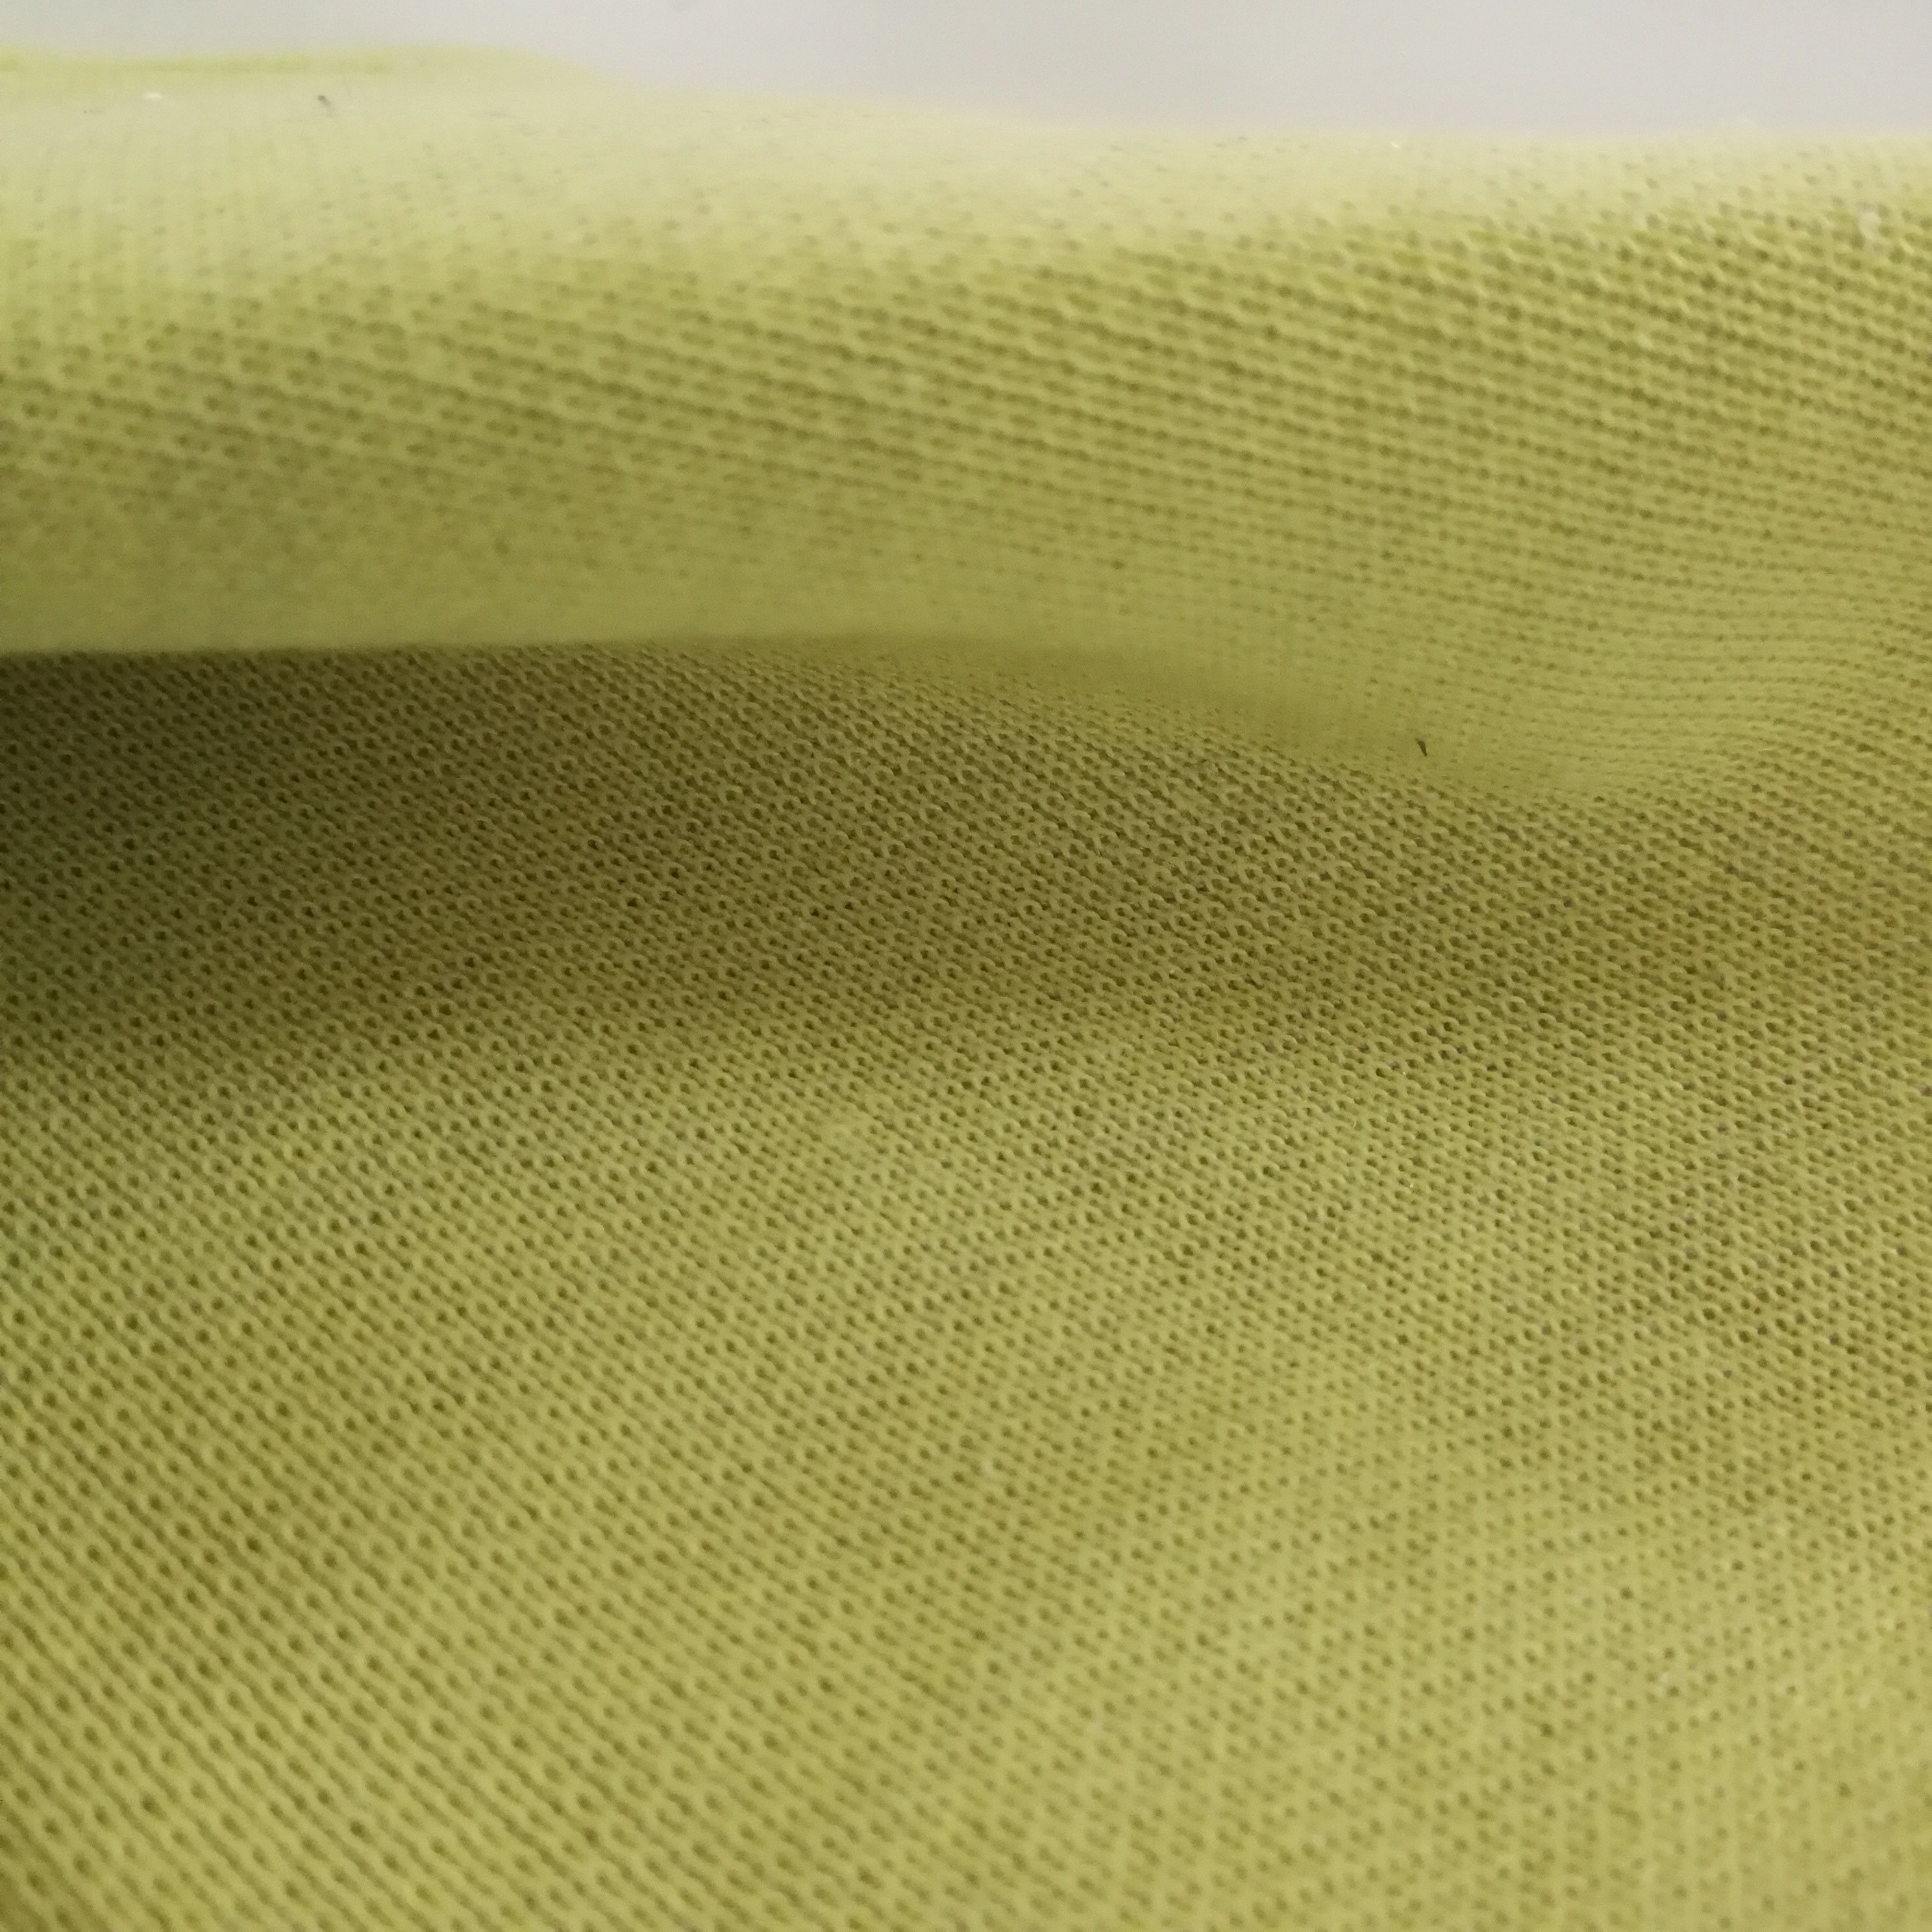 EN388 5 level polyester para aramid Kevlar fabric with cut resistant for comfortable lining